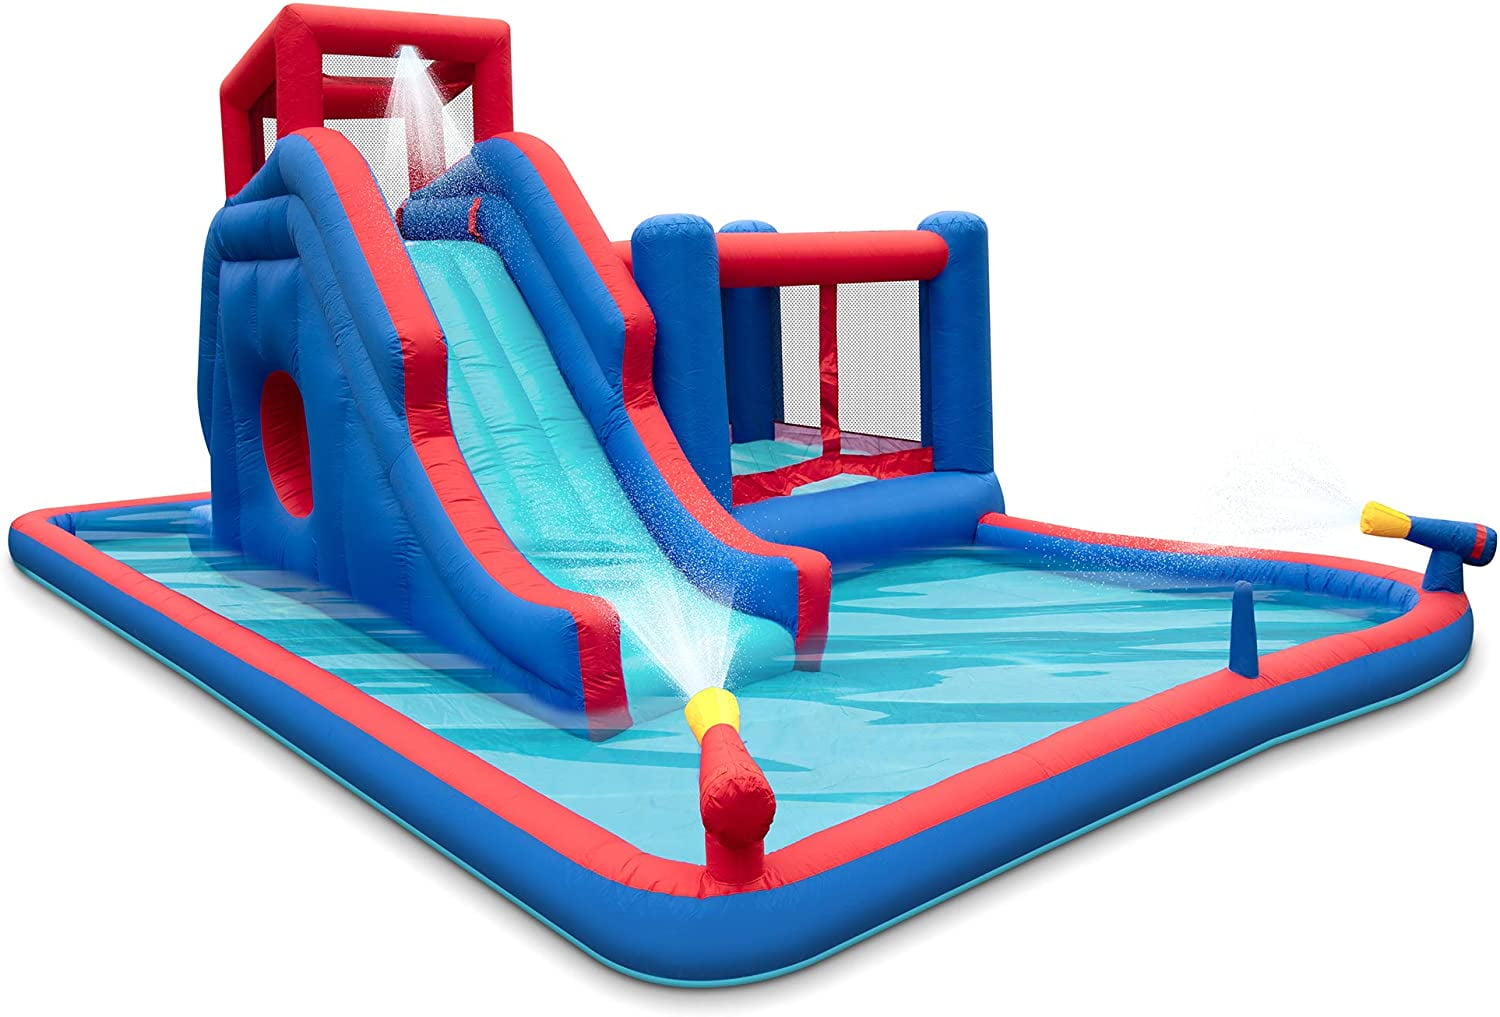 Bounce House with Slide for Dry and Wet Shark Waterslide for Outdoor Summer Fun AM0417 ACTION AIR Inflatable Water Slide Great Gift for Children